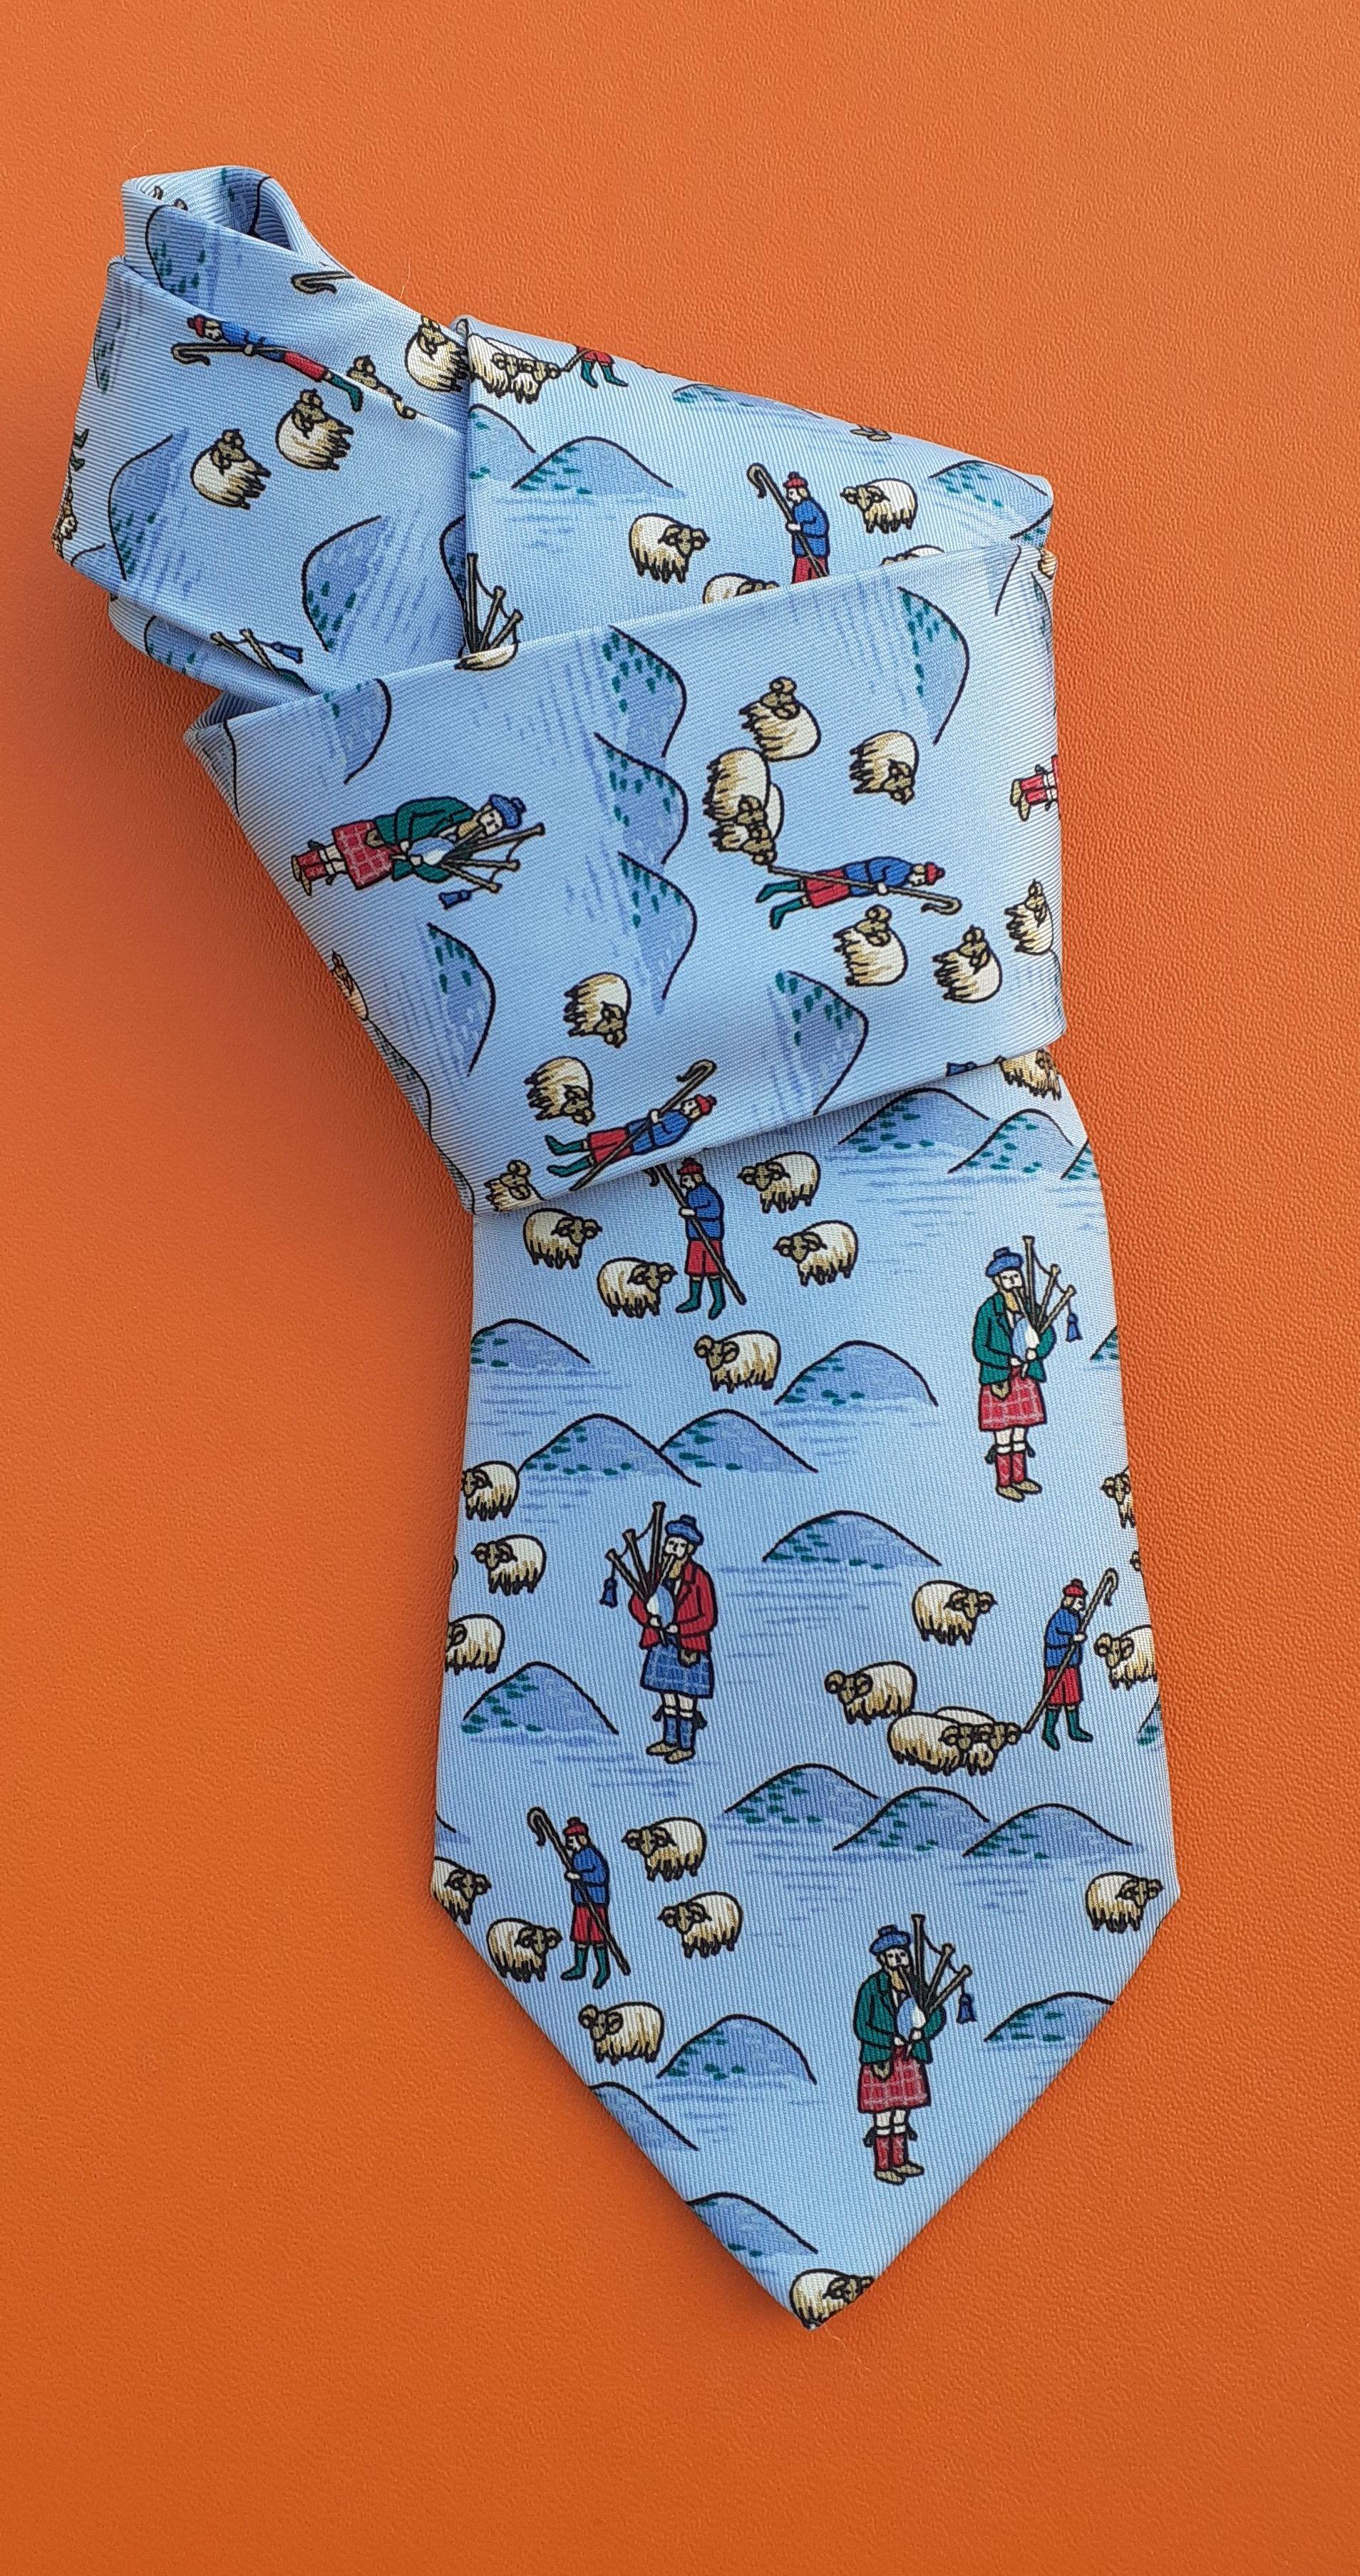 Cute Authentic Hermès Tie

Print: bagpipes and sheep

Made in France

100% Silk

Colorways: Sky Blue, White, Blue, Red, Green

Lined with plain sky blue silk

